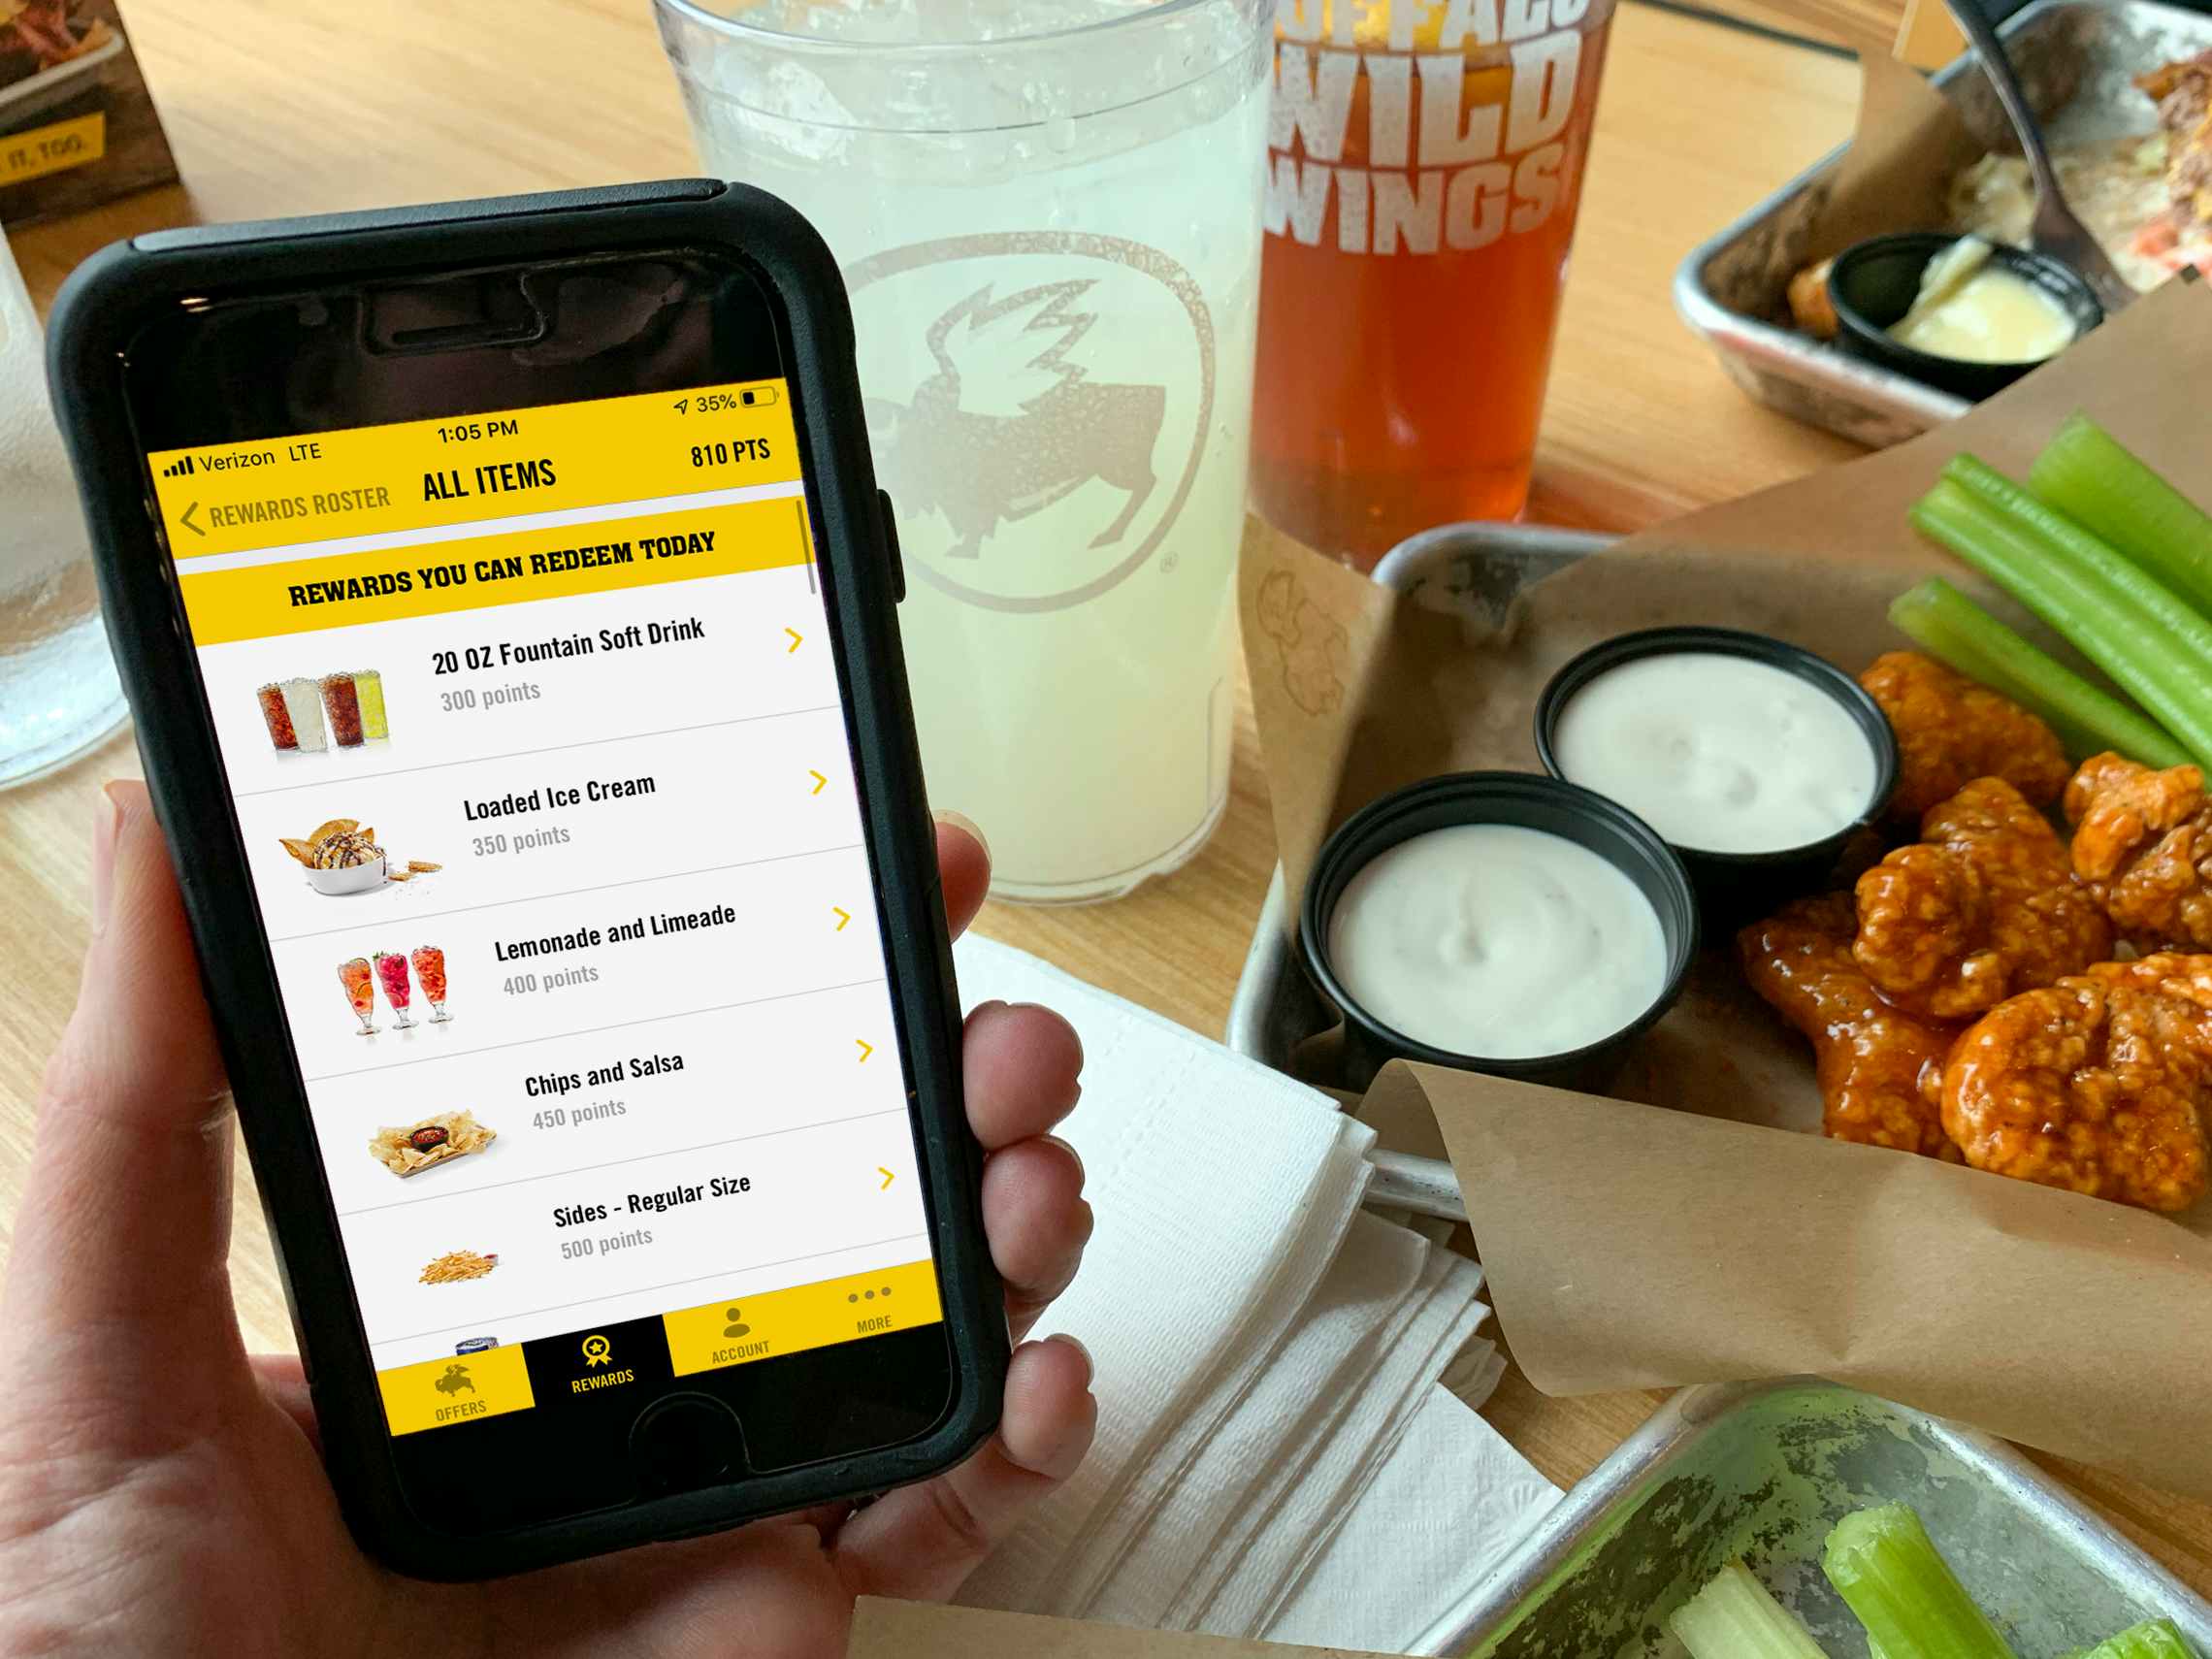 A person holding their iPhone with the Buffalo Wild Wings mobile app open to the Rewards Roster page; the list shows the user's redeemable rewards. On the table in the background, there are two drinks and a platter of breaded boneless wings, two dip cups, and some celery.